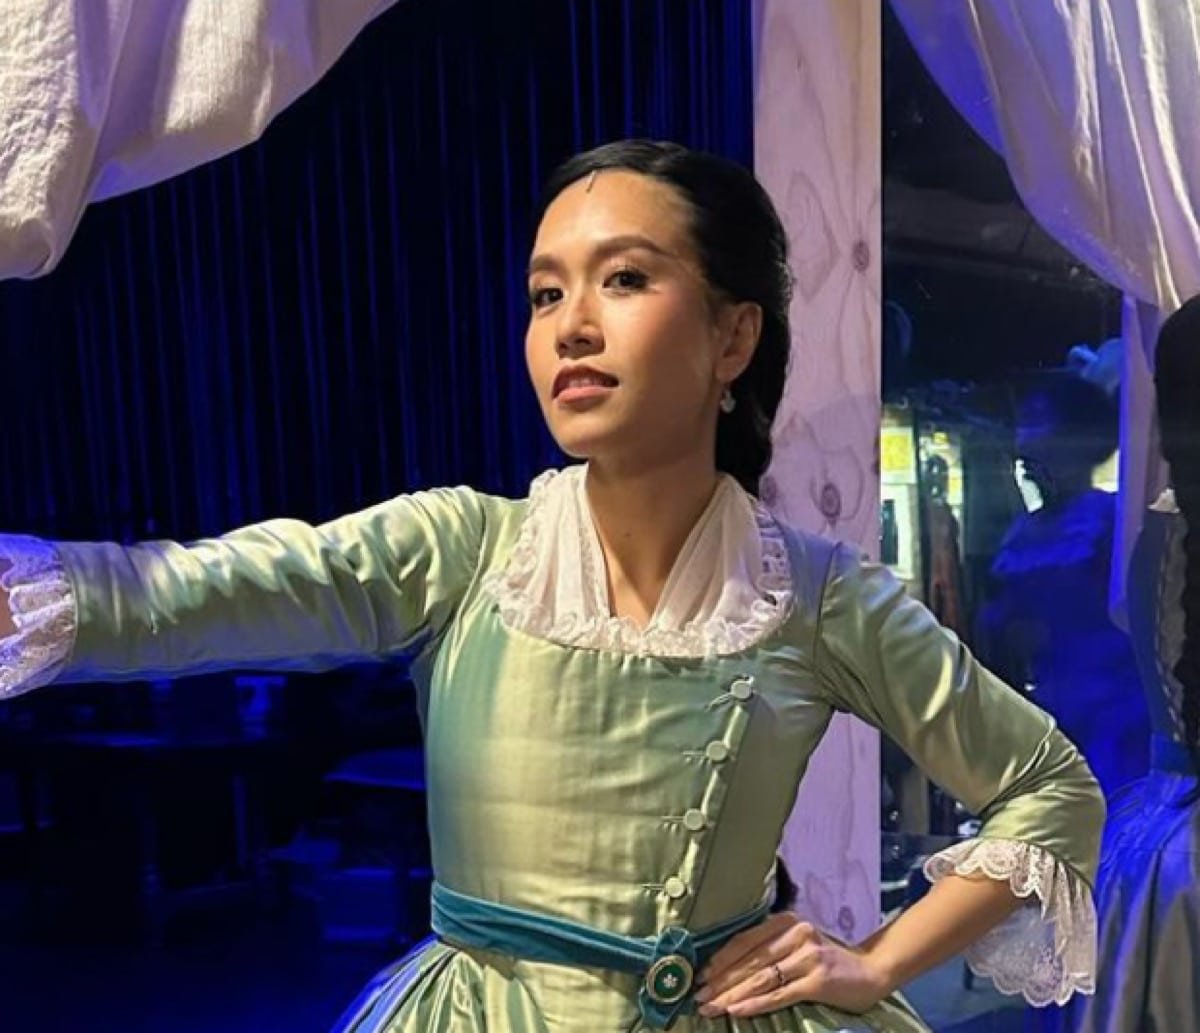 Rachelle Ann Go back on stage after bout with pneumonia